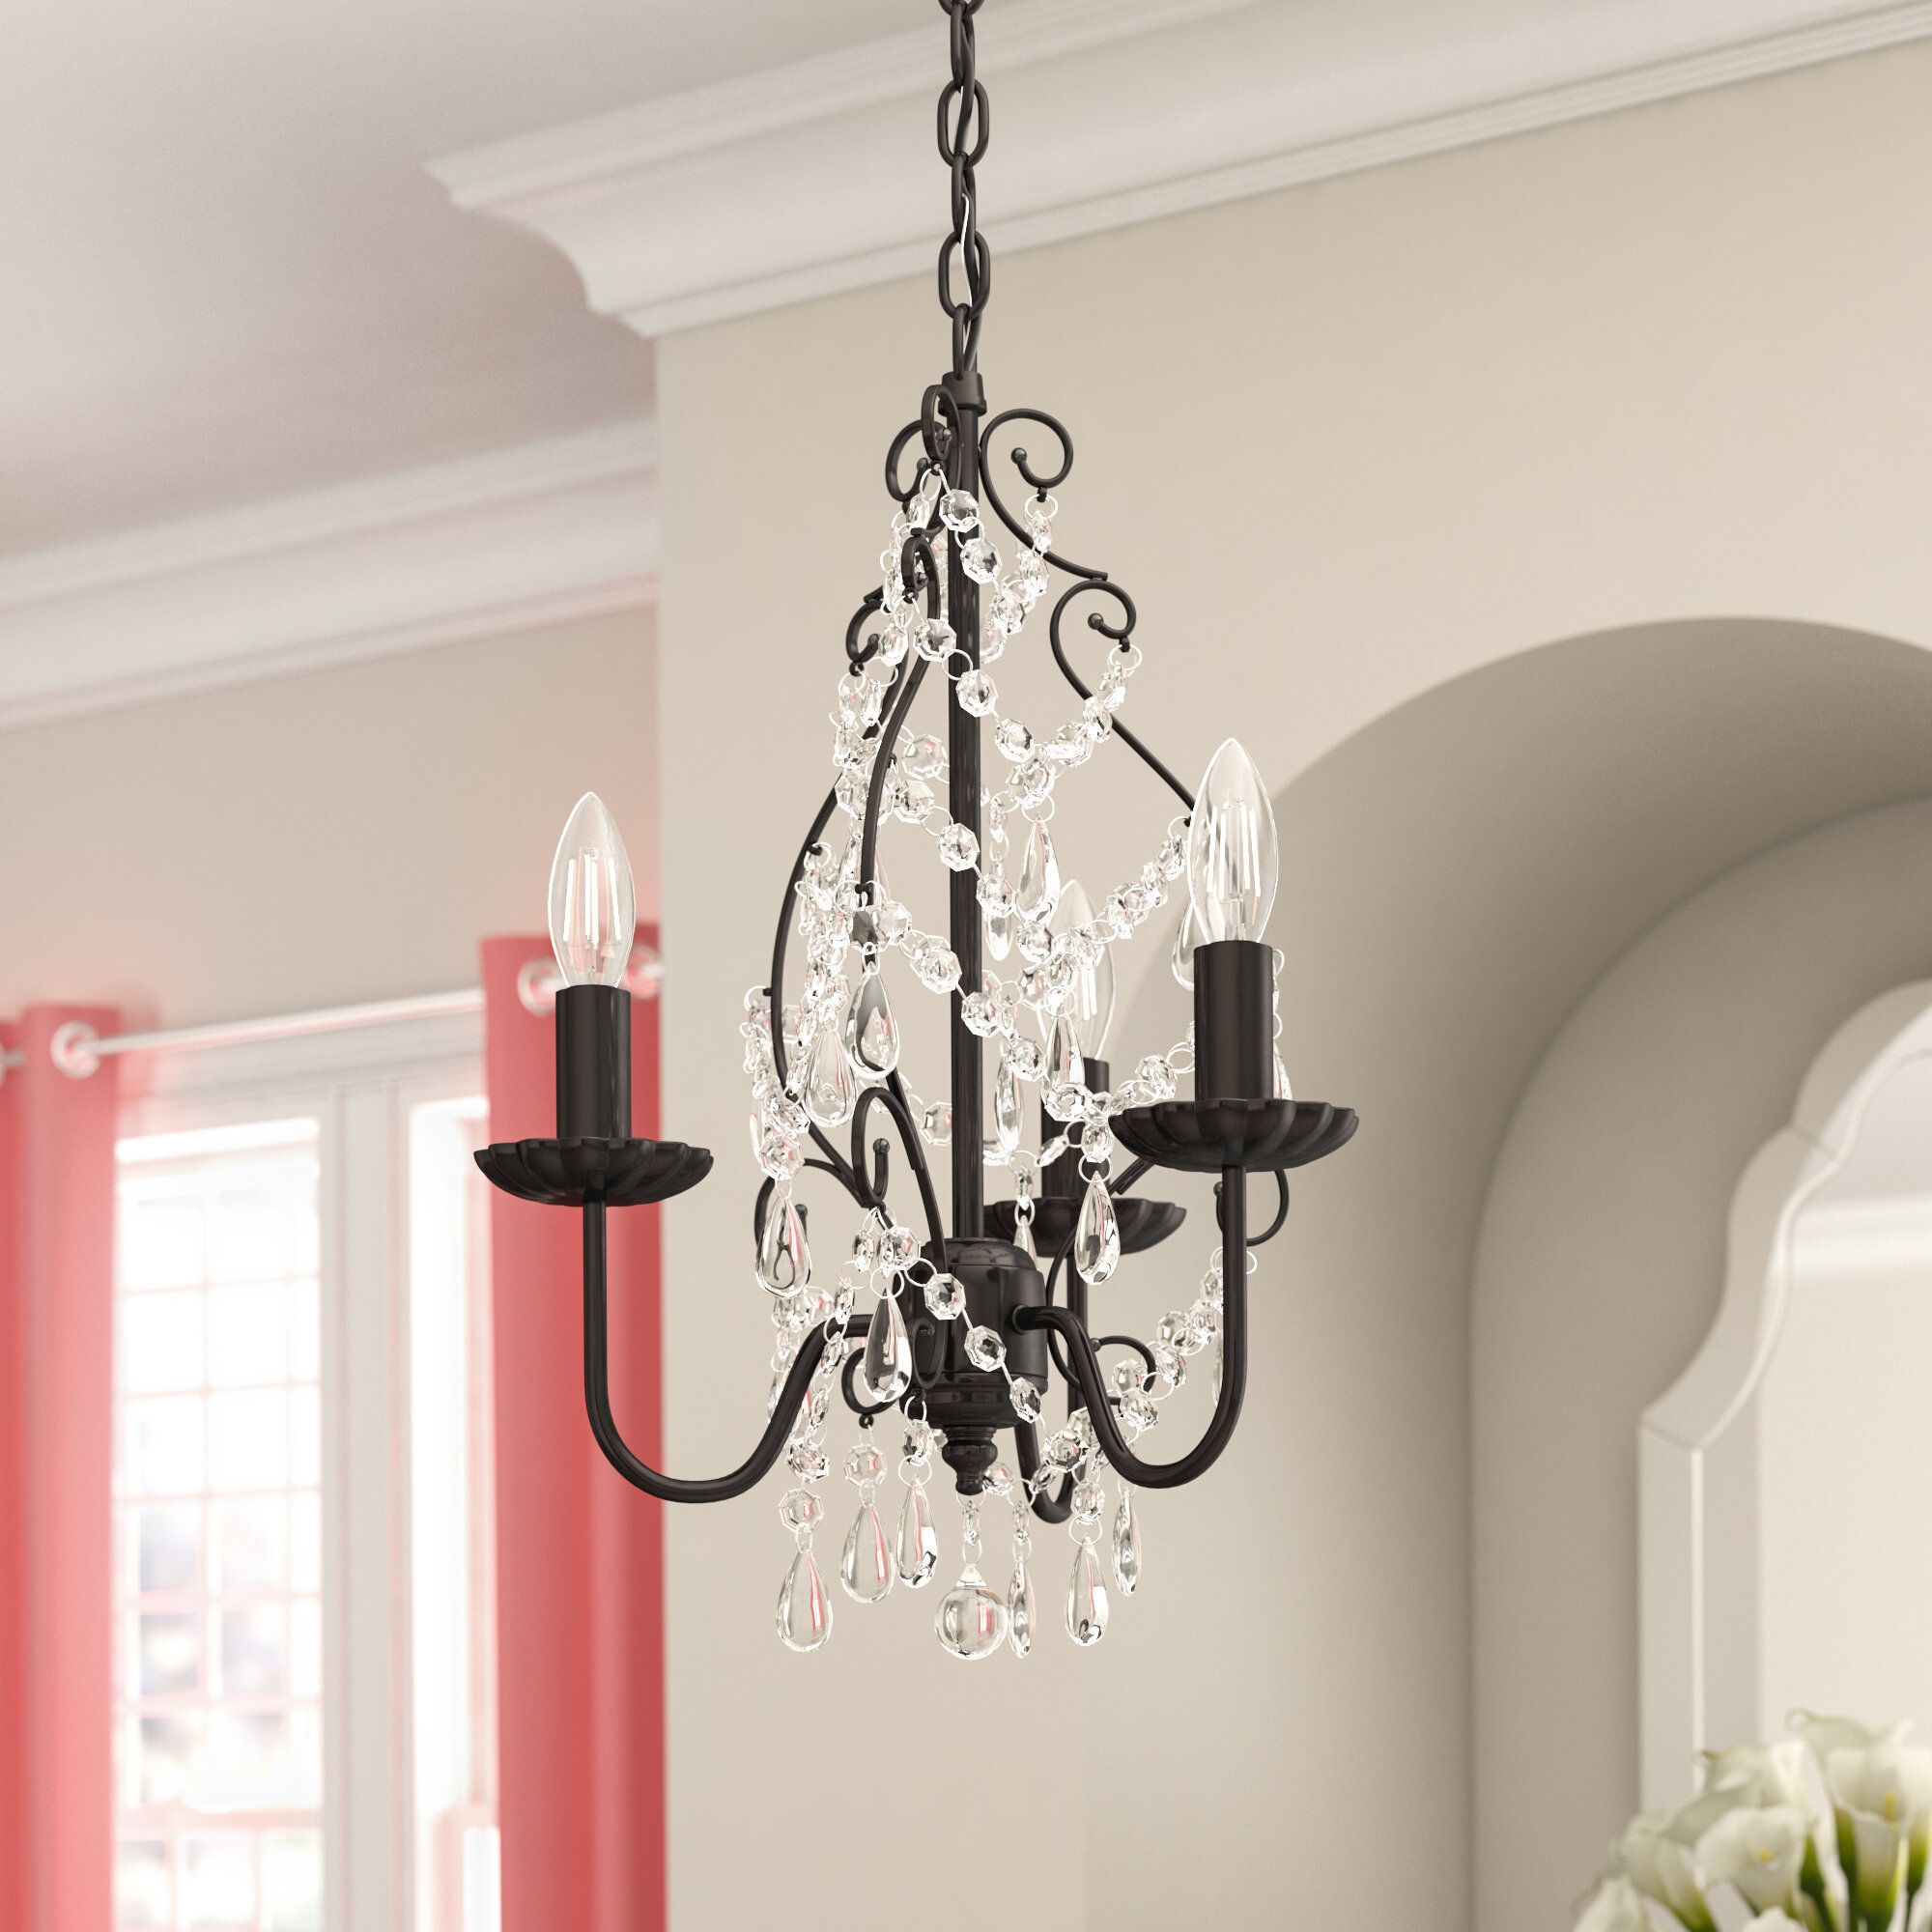 Archway 3 Light Candle Style Chandelier Intended For Blanchette 5 Light Candle Style Chandeliers (View 15 of 30)